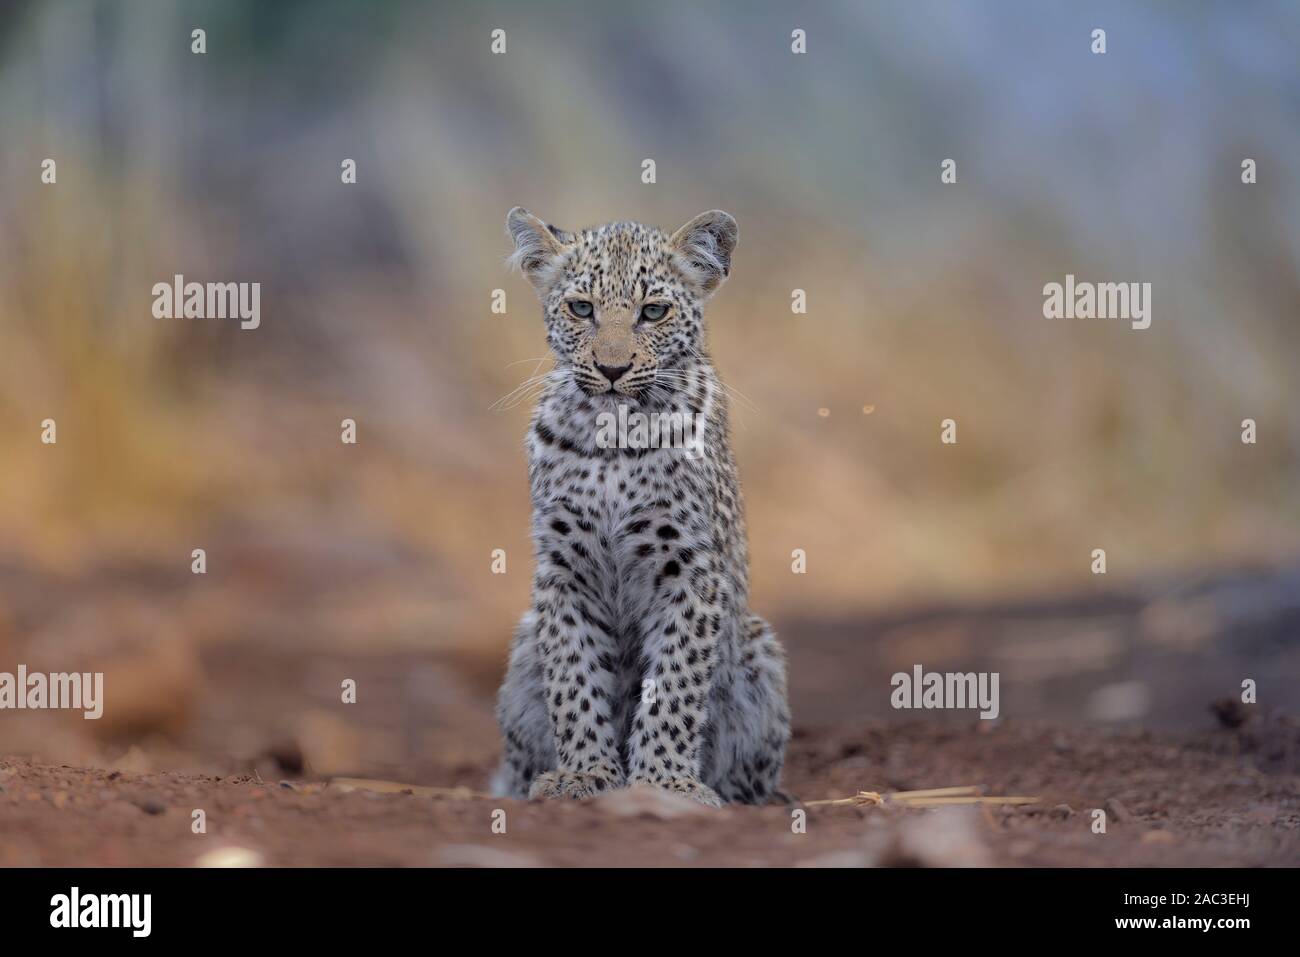 Baby leopard portrait with blue eyes Stock Photo